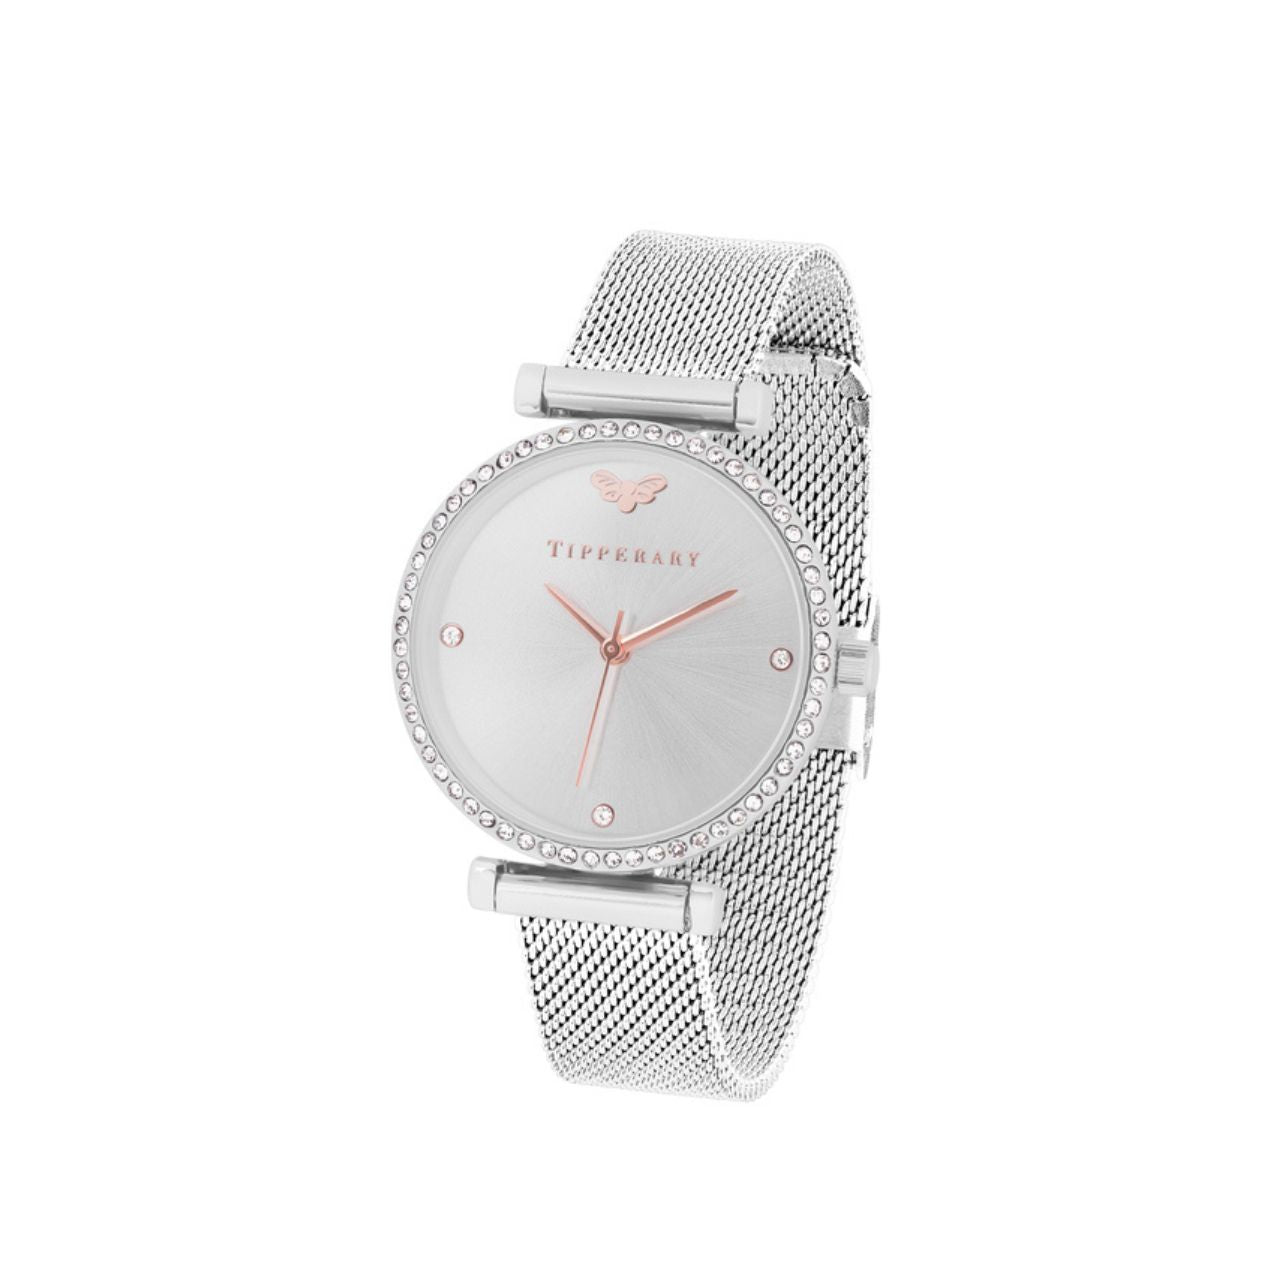 Bee Silver Watch by Tipperary  Presenting the "BEE SILVER WATCH" by Tipperary Crystal, a brand renowned for superior quality and timeless elegance. This exquisite silver watch is part of our prestigious Bee Collection, embodying the perfect blend of style, sophistication, and craftsmanship.